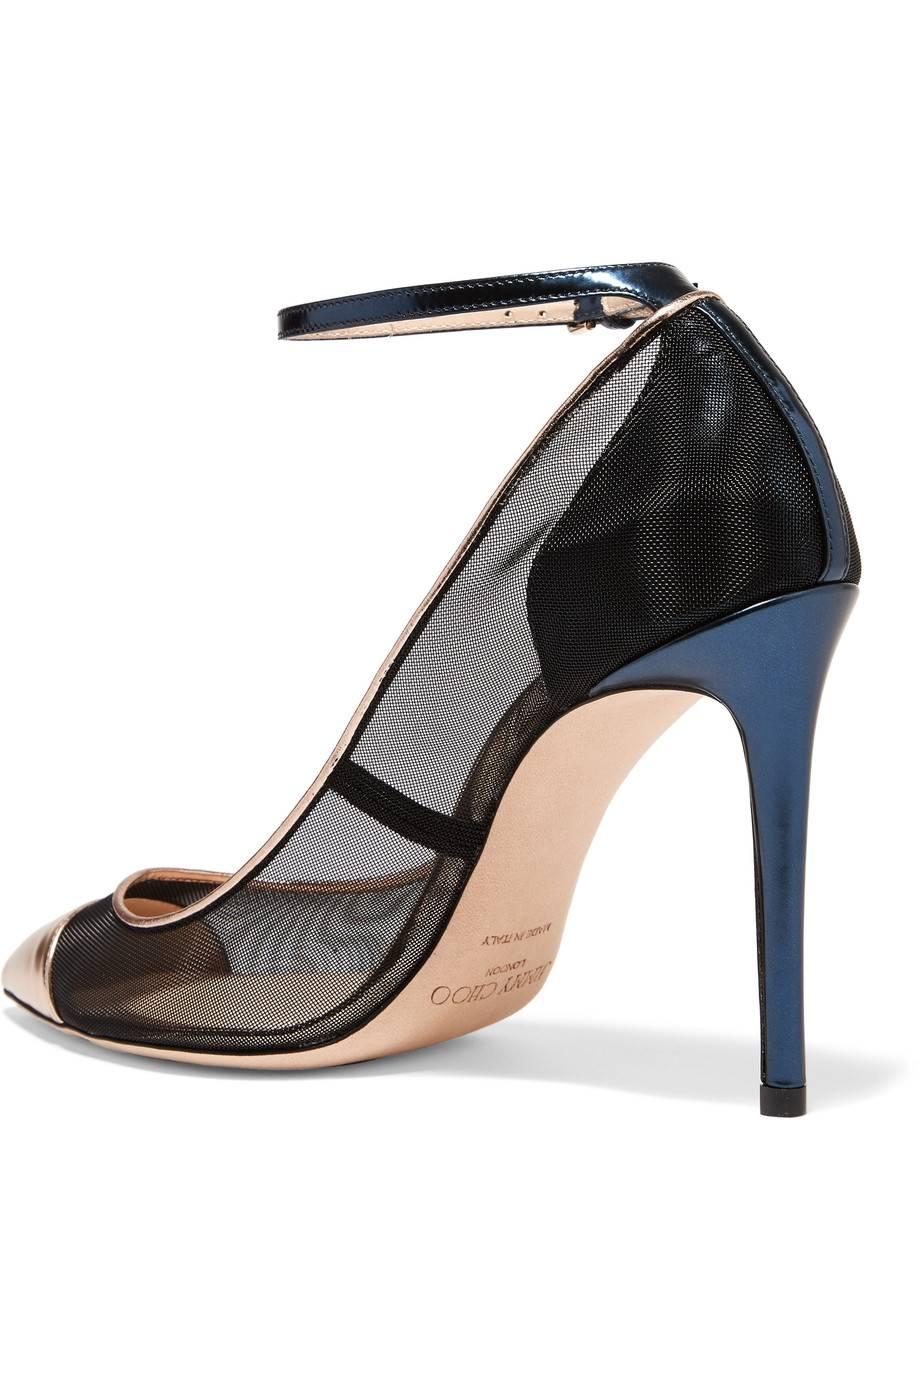 Women's Jimmy Choo New Sold Out Mesh Black Blue Gold Evening Sandals Heels in Box